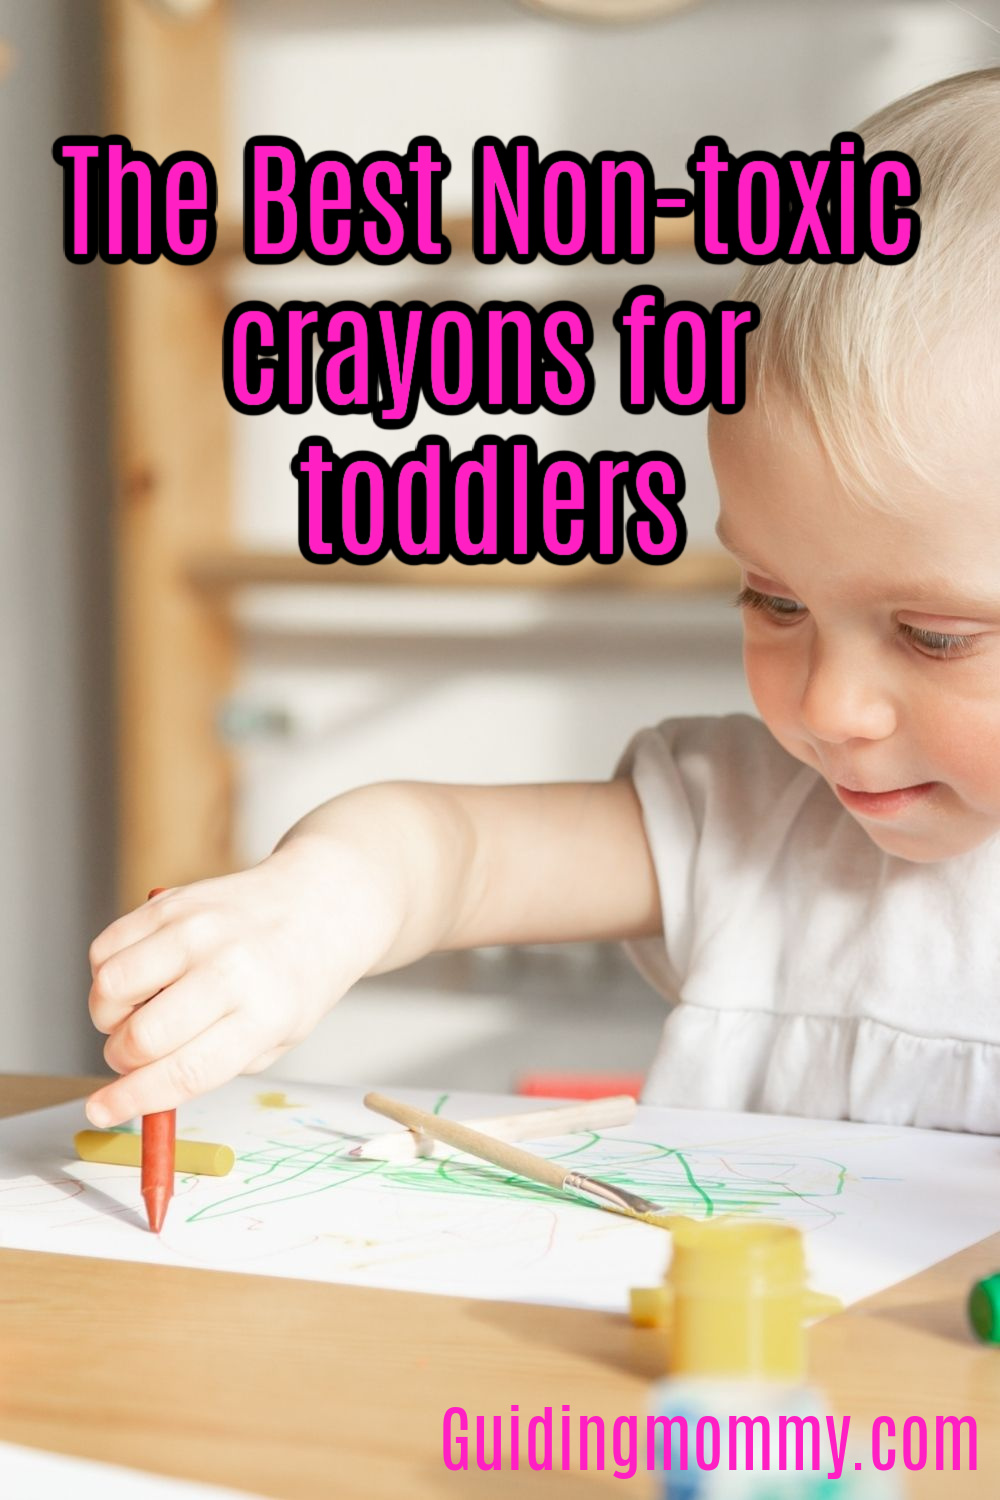 Non-toxic crayons for toddlers